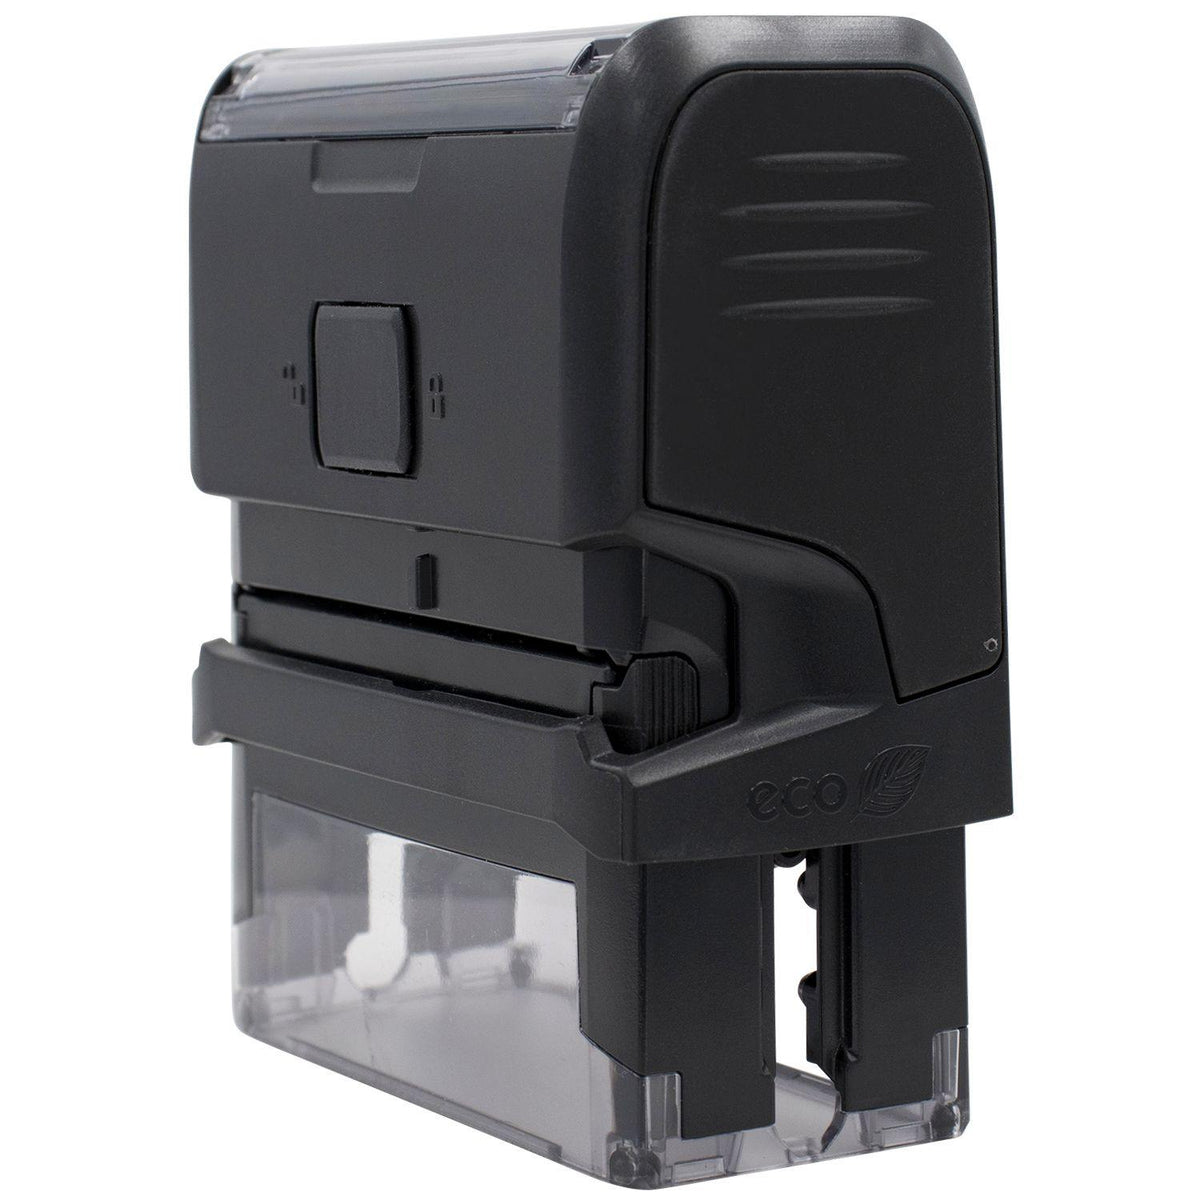 Self Inking Storage Stamp - Engineer Seal Stamps - Brand_Trodat, Impression Size_Small, Stamp Type_Self-Inking Stamp, Type of Use_Office